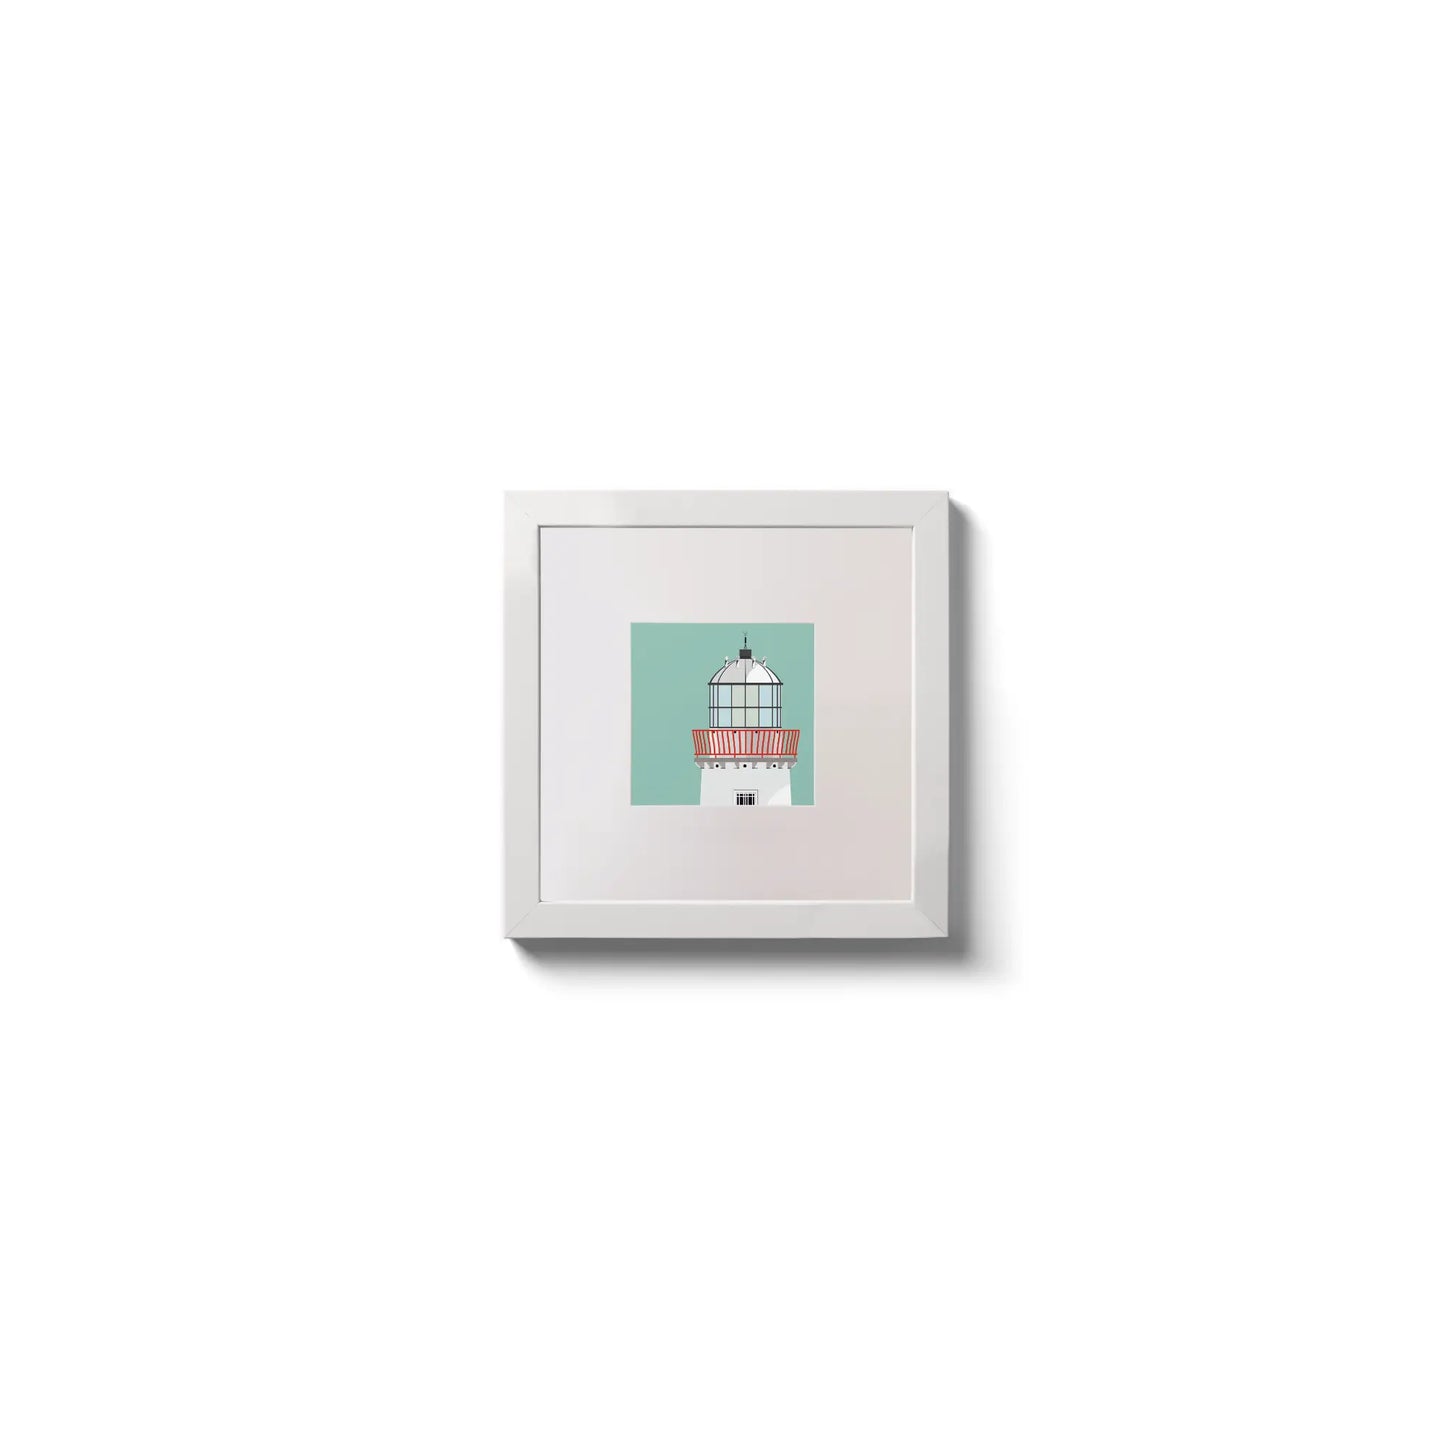 Illustration of Mutton Island lighthouse on an ocean green background,  in a white square frame measuring 10x10cm.